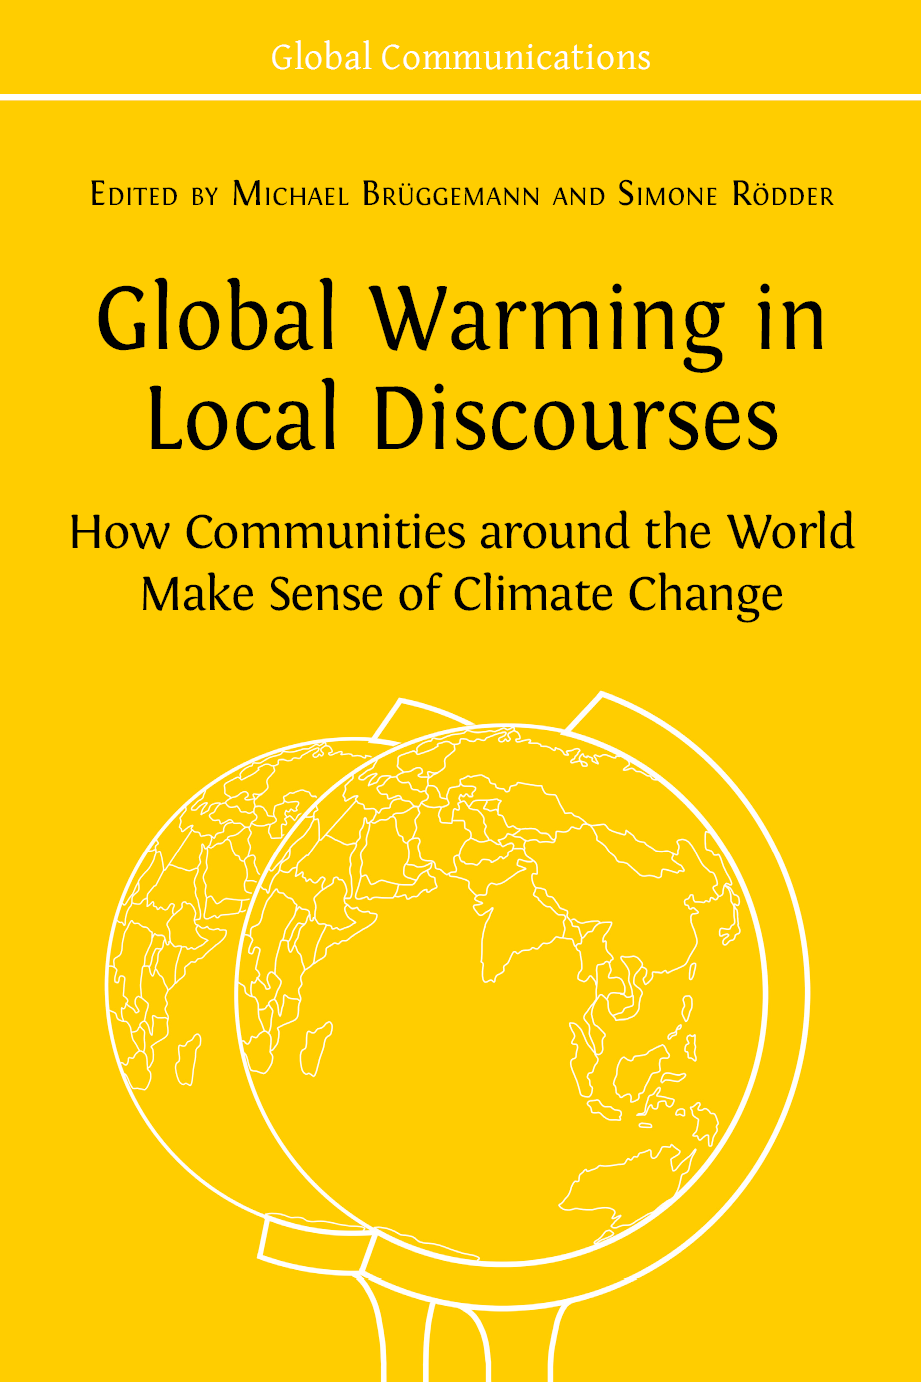 Global Warming in Local Discourses book cover image